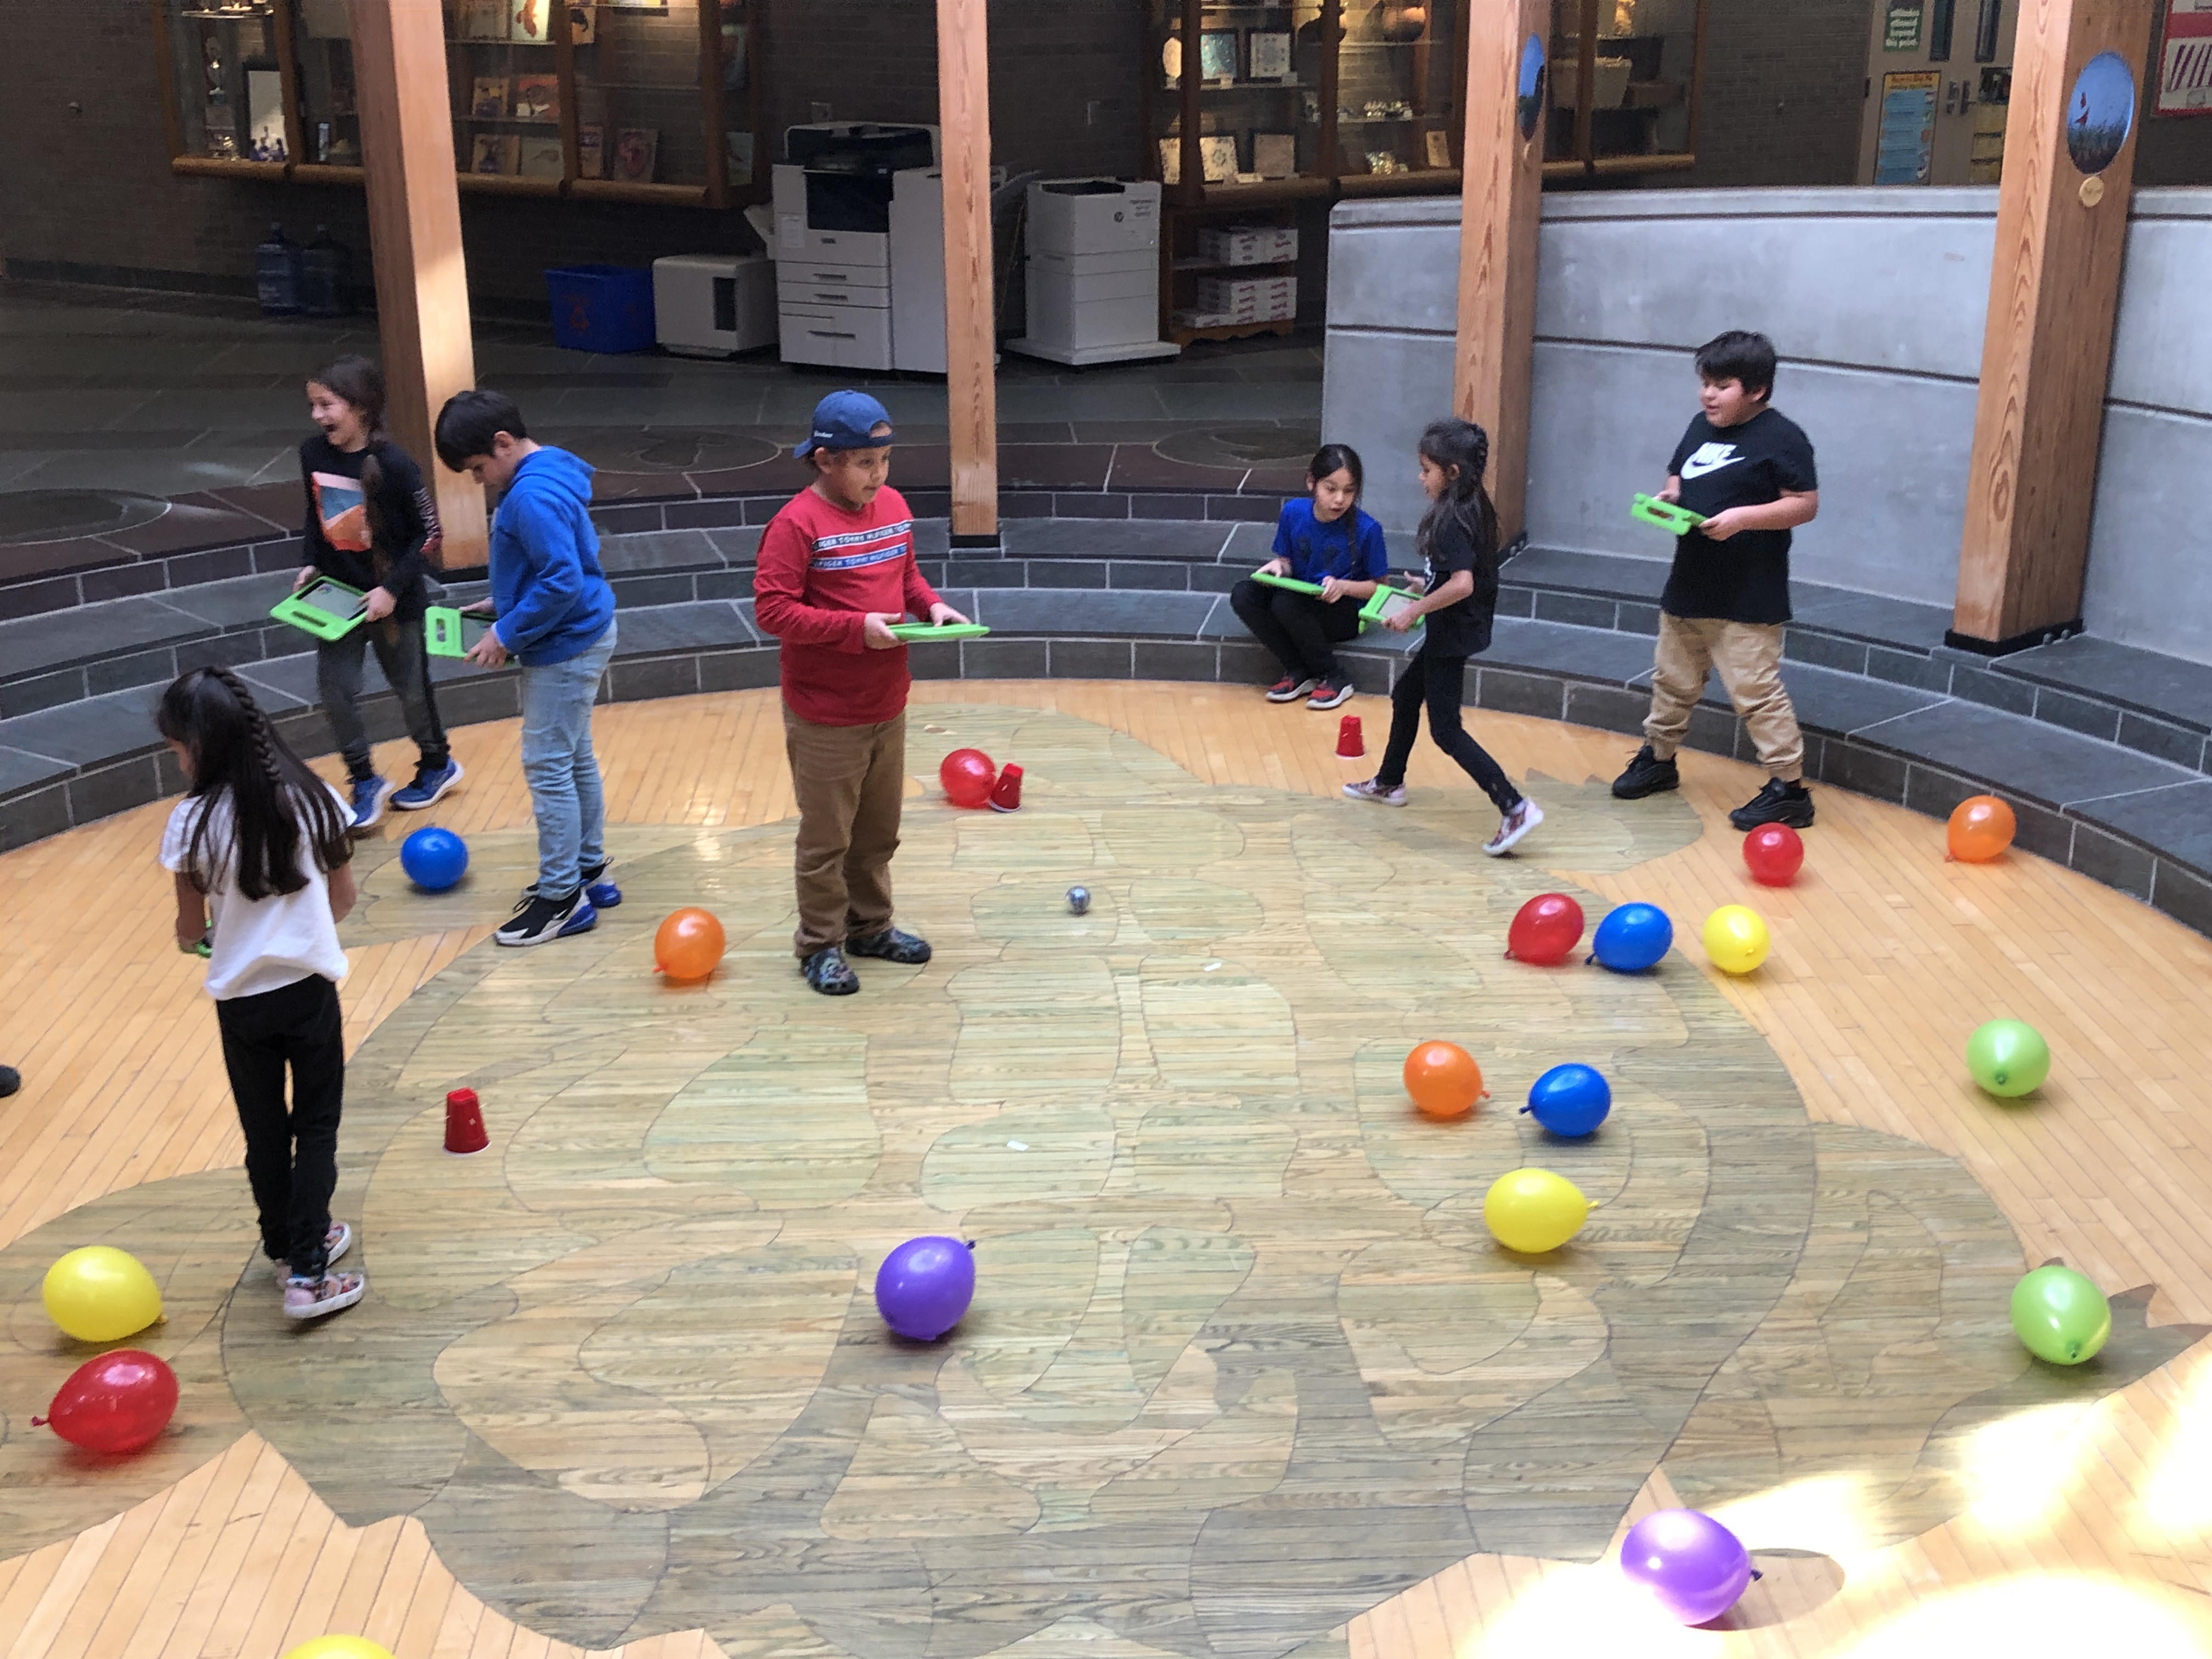 students engaged in balloon game